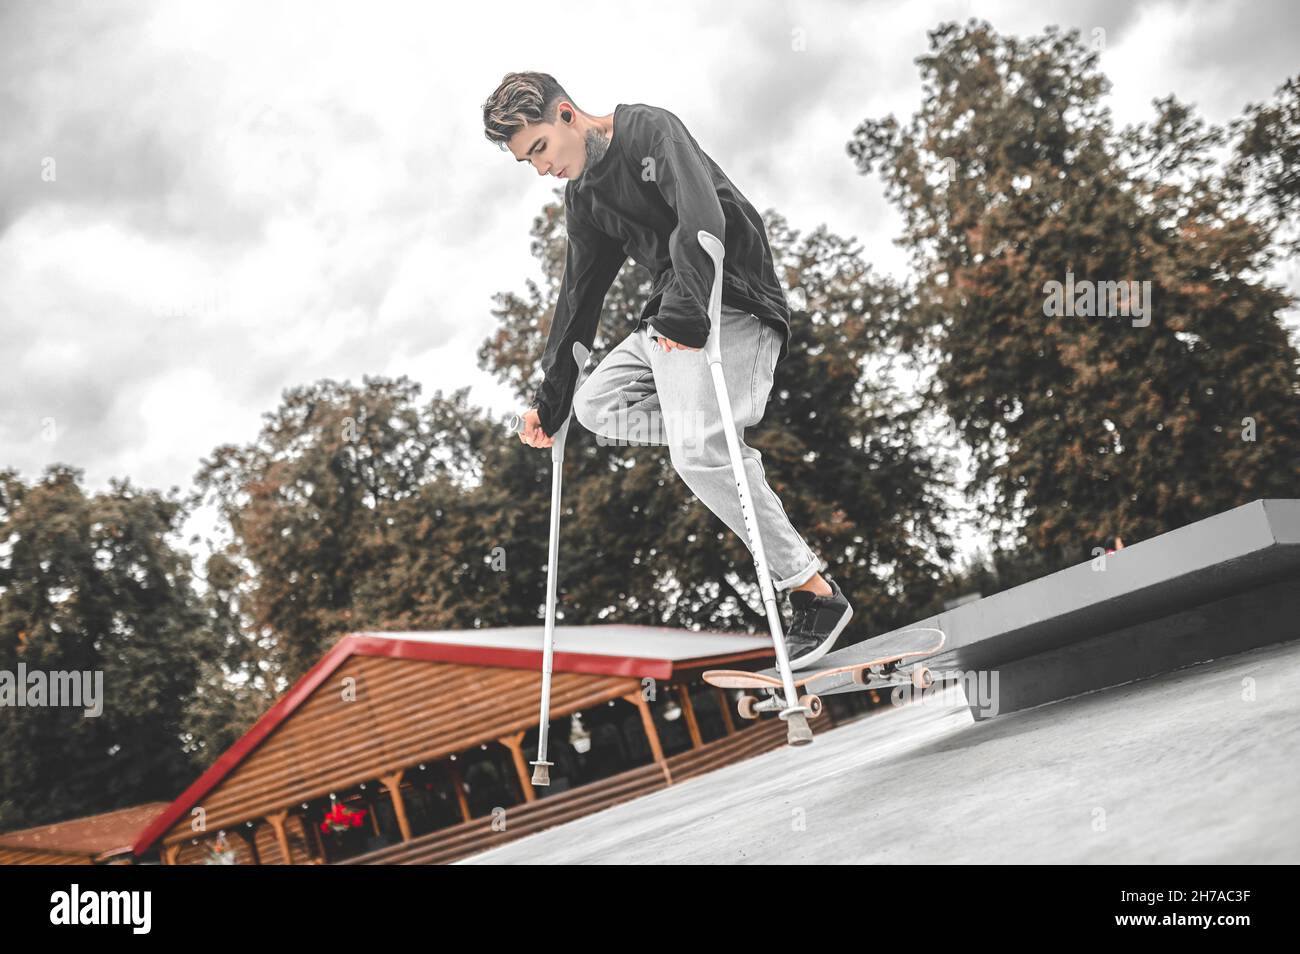 Disabled guy successfully jumping on skateboard from springboard Stock Photo